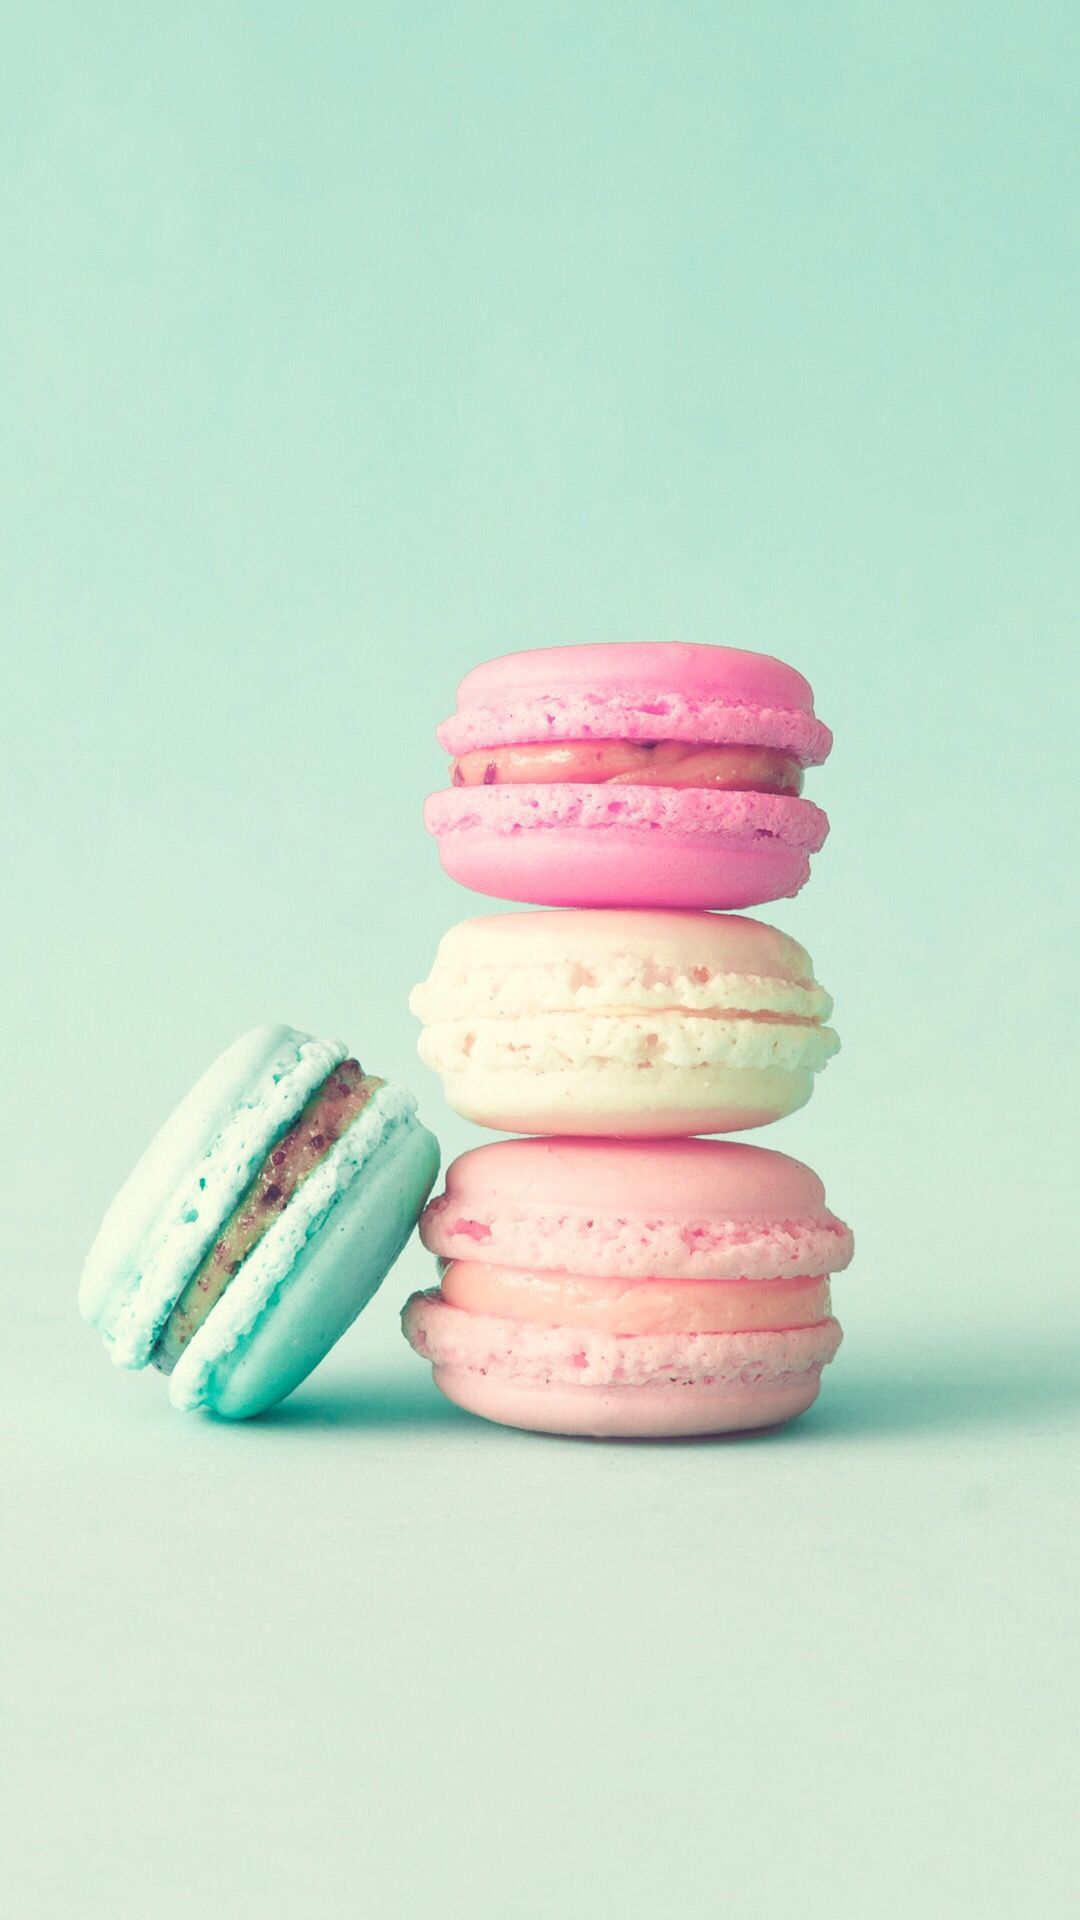 A stack of four colorful macarons on a blue background - Macarons